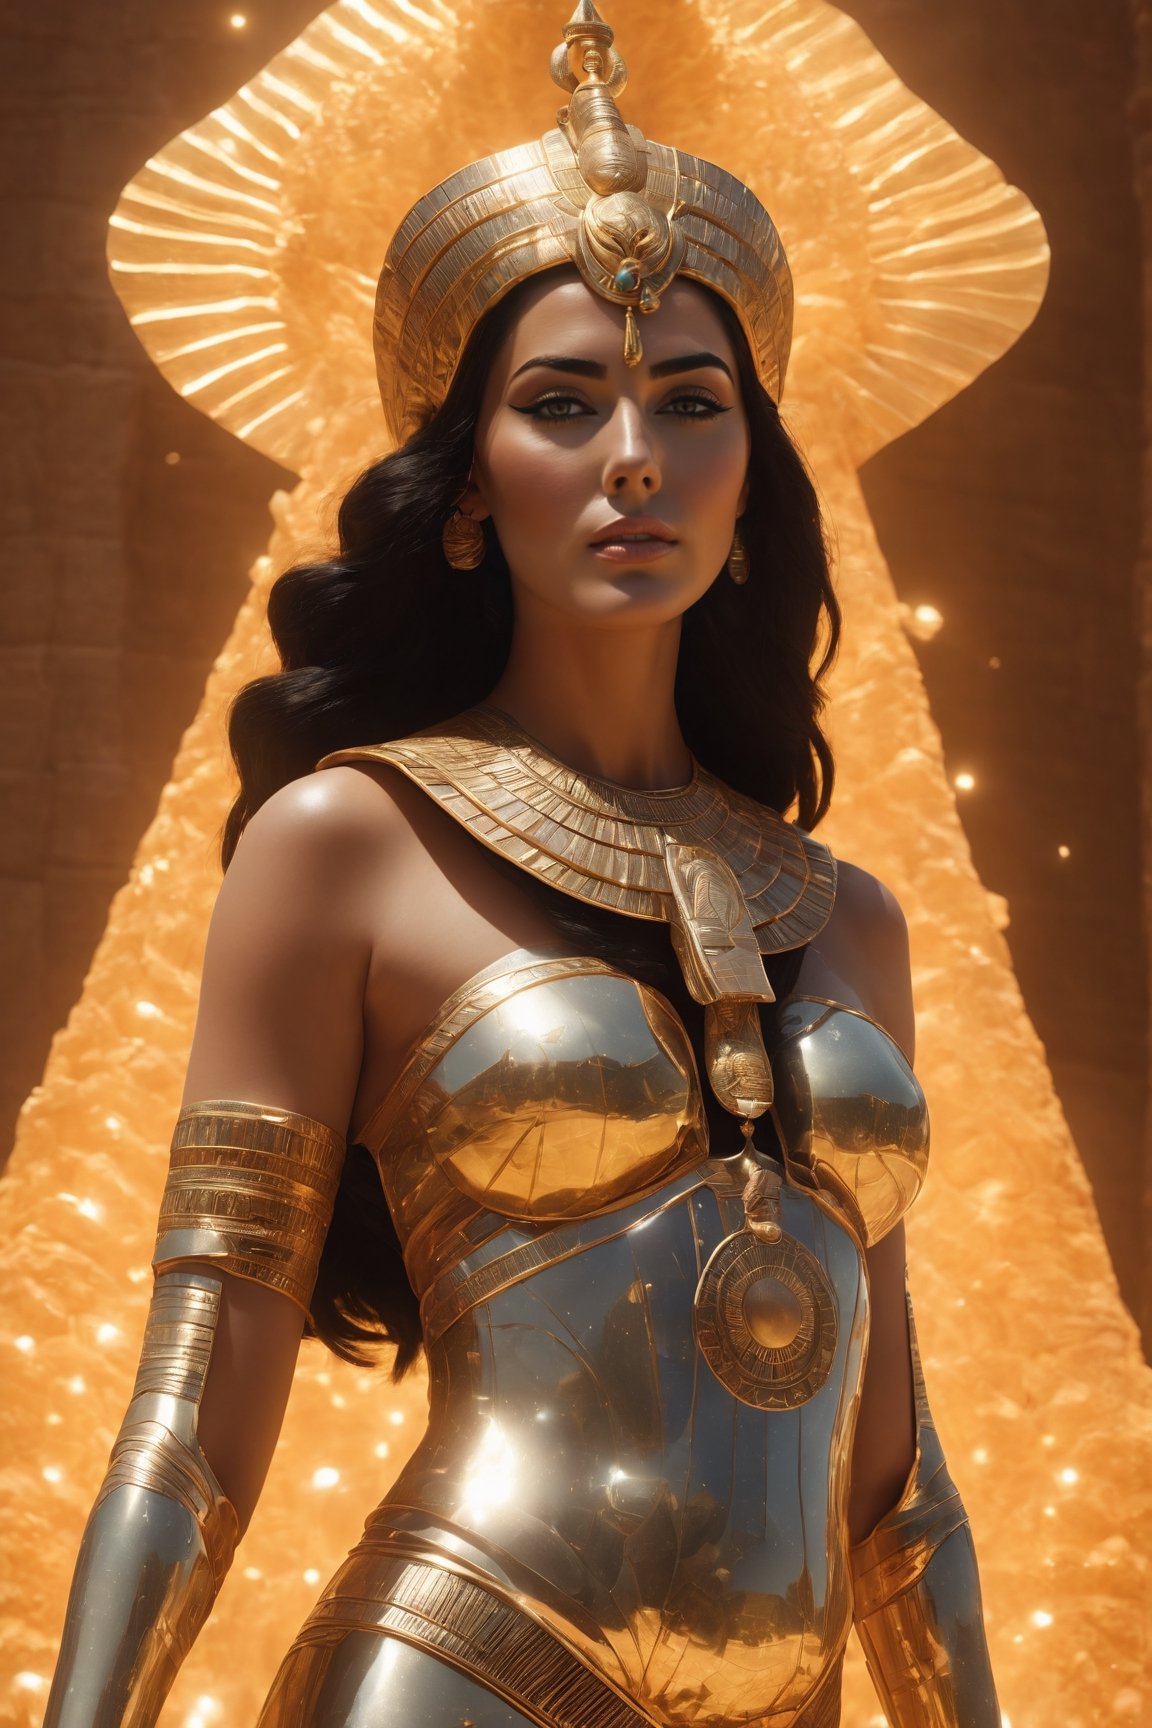  (in Egypt), (Egyptian gods), (Coral Pyramid Egypt behind), (character Isis), egyptian style, ((full body)), fire as part of human body, black_hair, nature, detailed makeup egyptian style, subsurface scattering, transparent, translucent skin, glow, bloom, Bioluminescent liquid,3d style,cyborg style,Movie Still,Leonardo Style, warm color, vibrant, volumetric light, pregned,xxmix_girl, Monica Bellucci, realistic skin:1.5, dfdd, (translucent blooms), aw0k, (((floating energy bubbles))), Floating:1.5, huayu, dancing, 6000, LostRuins, scenery, Dark,Sekmeth deity